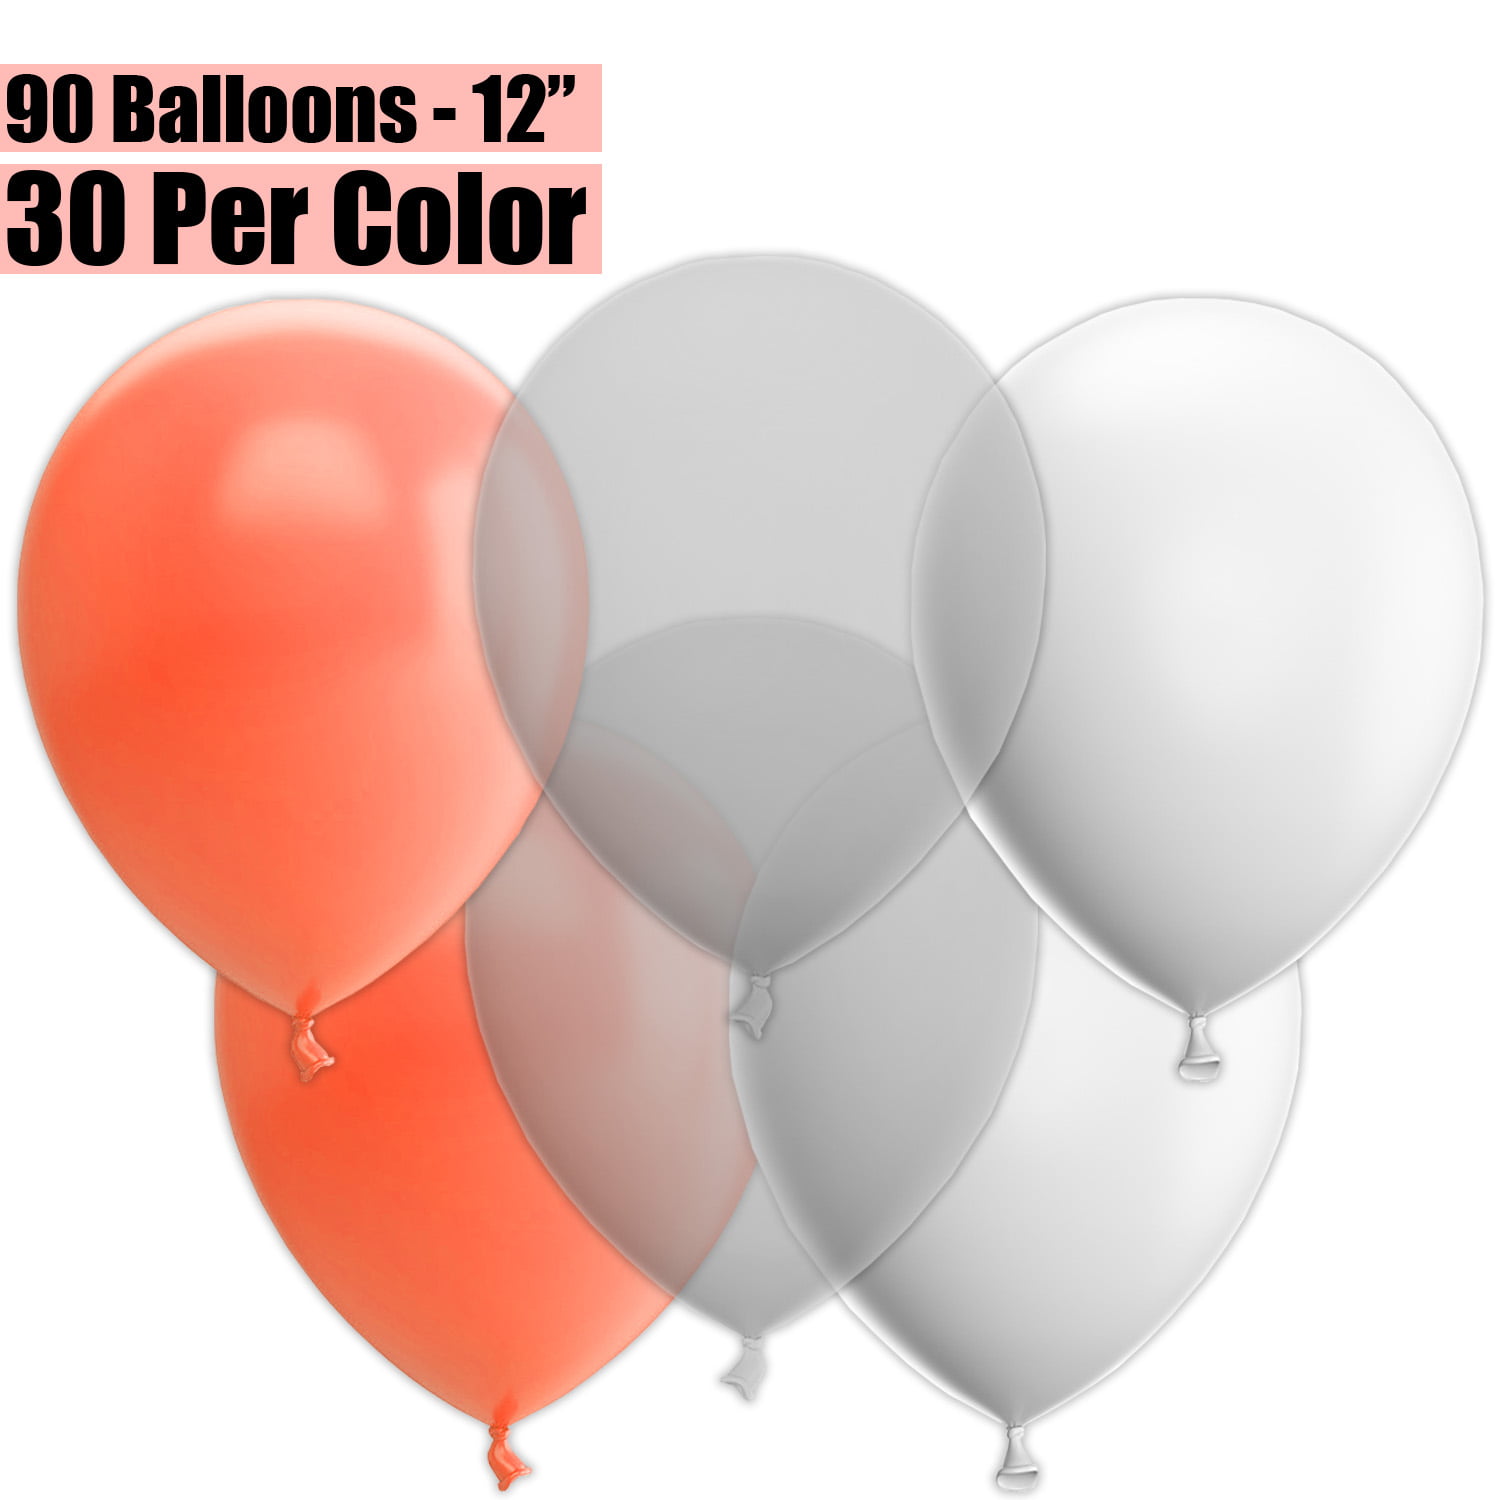 72 Latex Balloons 12" With Clips and Curling Ribbon-Peach 